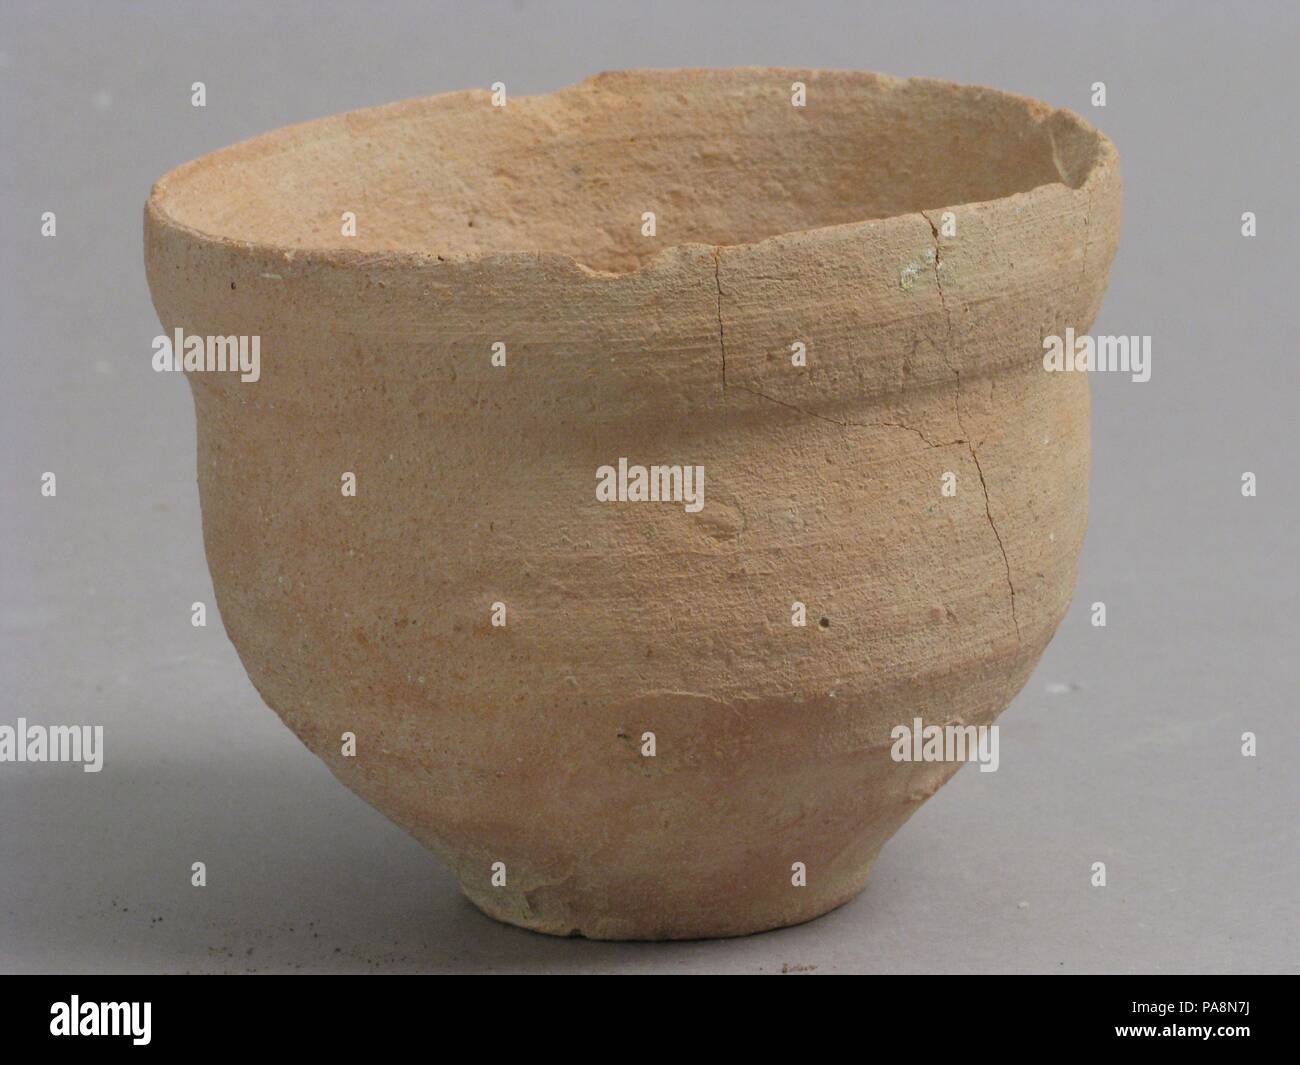 Bowl. Culture: Coptic. Dimensions: Overall: 2 15/16 x 3 1/2 in. (7.4 x 8.9 cm). Date: 4th-7th century. Museum: Metropolitan Museum of Art, New York, USA. Stock Photo